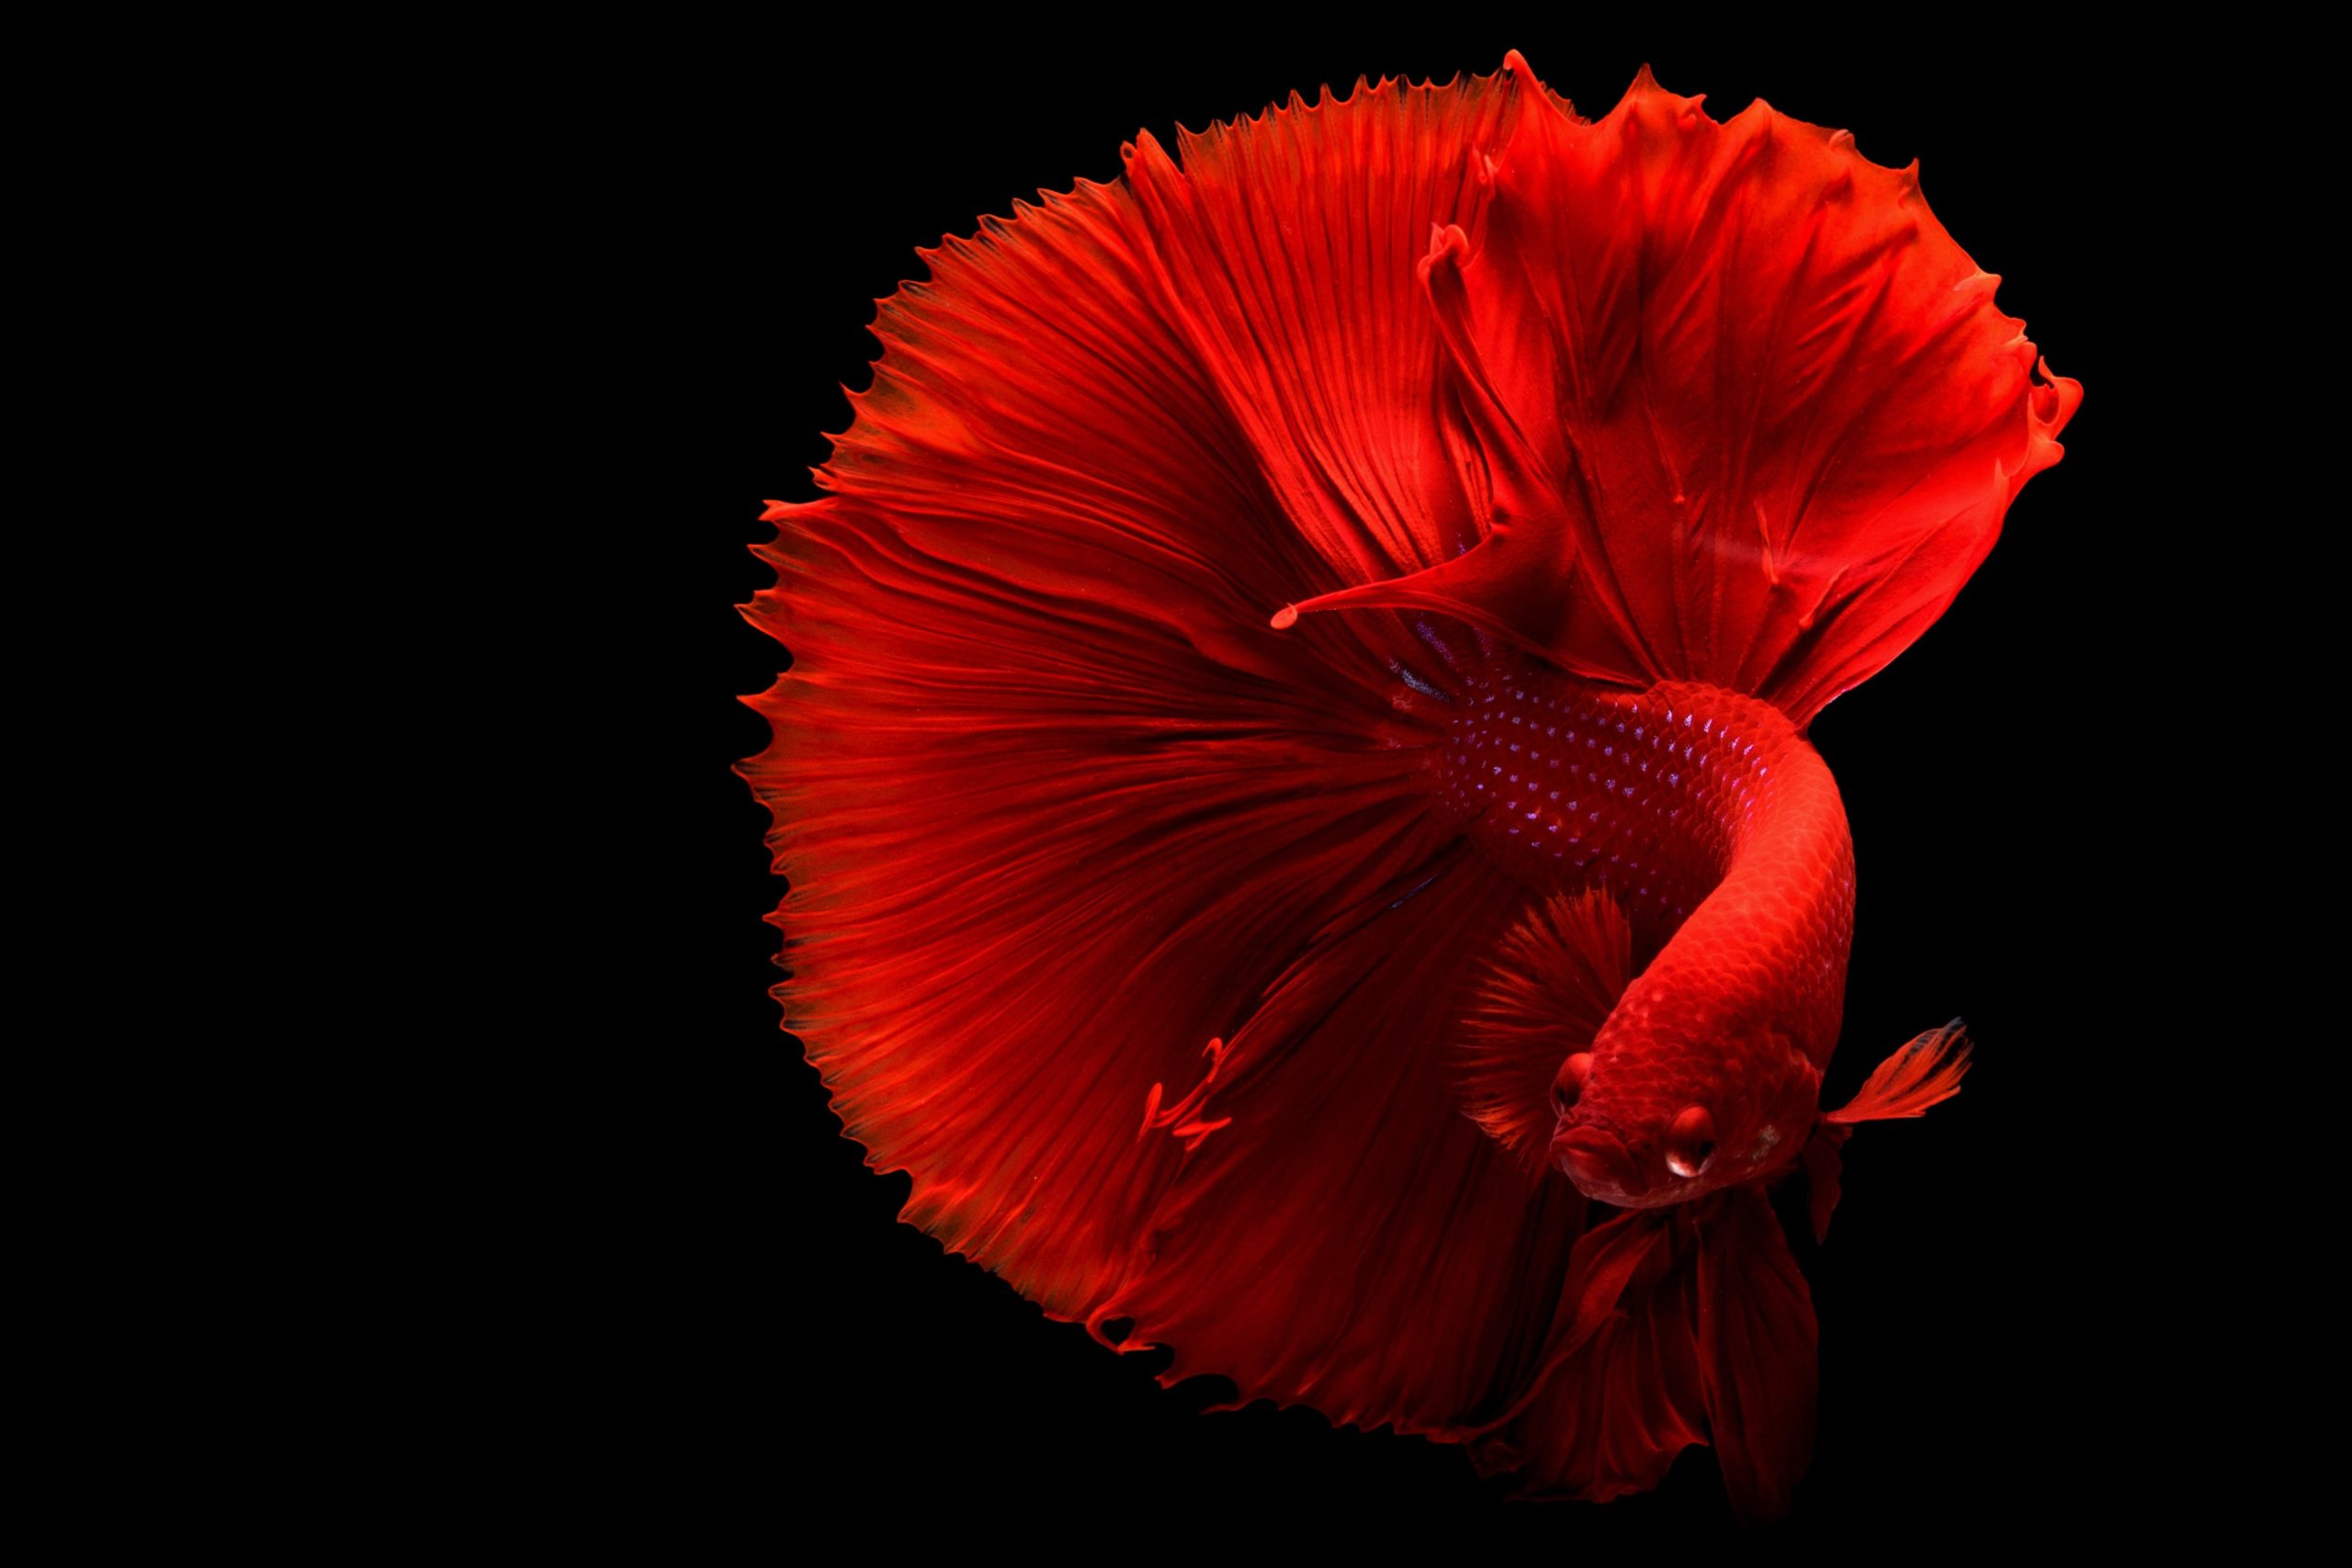 What to Know About Owning a Betta Fish